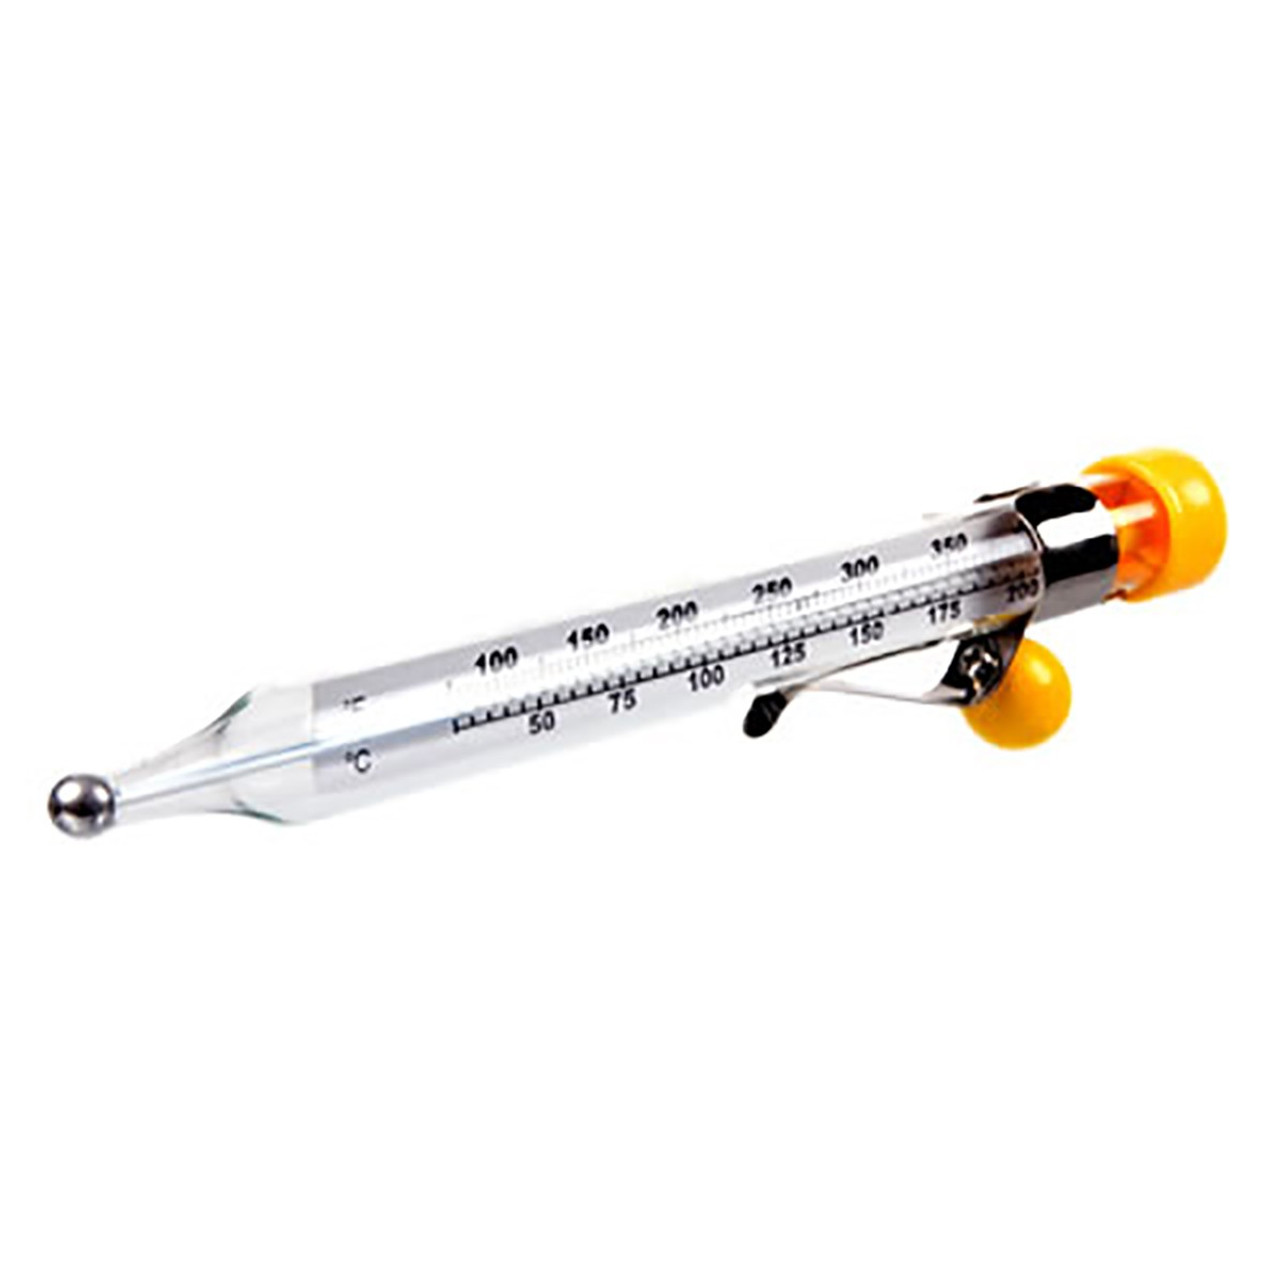 Wax Thermometer